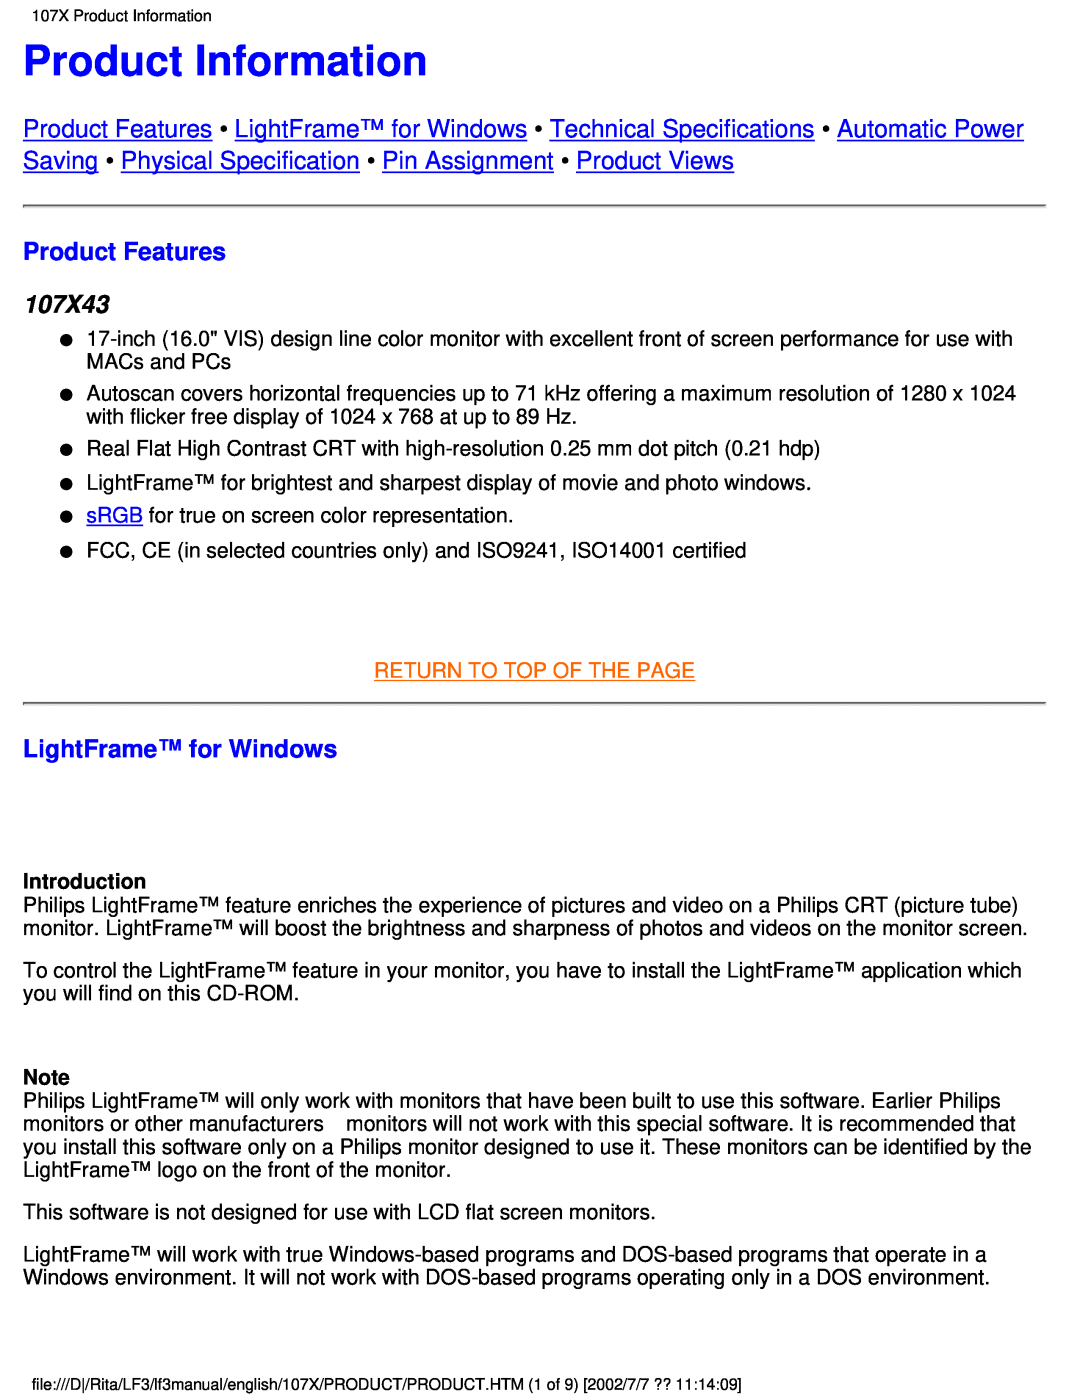 Philips 170X user manual Product Information, Product Features, 107X43, LightFrame for Windows, Return To Top Of The Page 